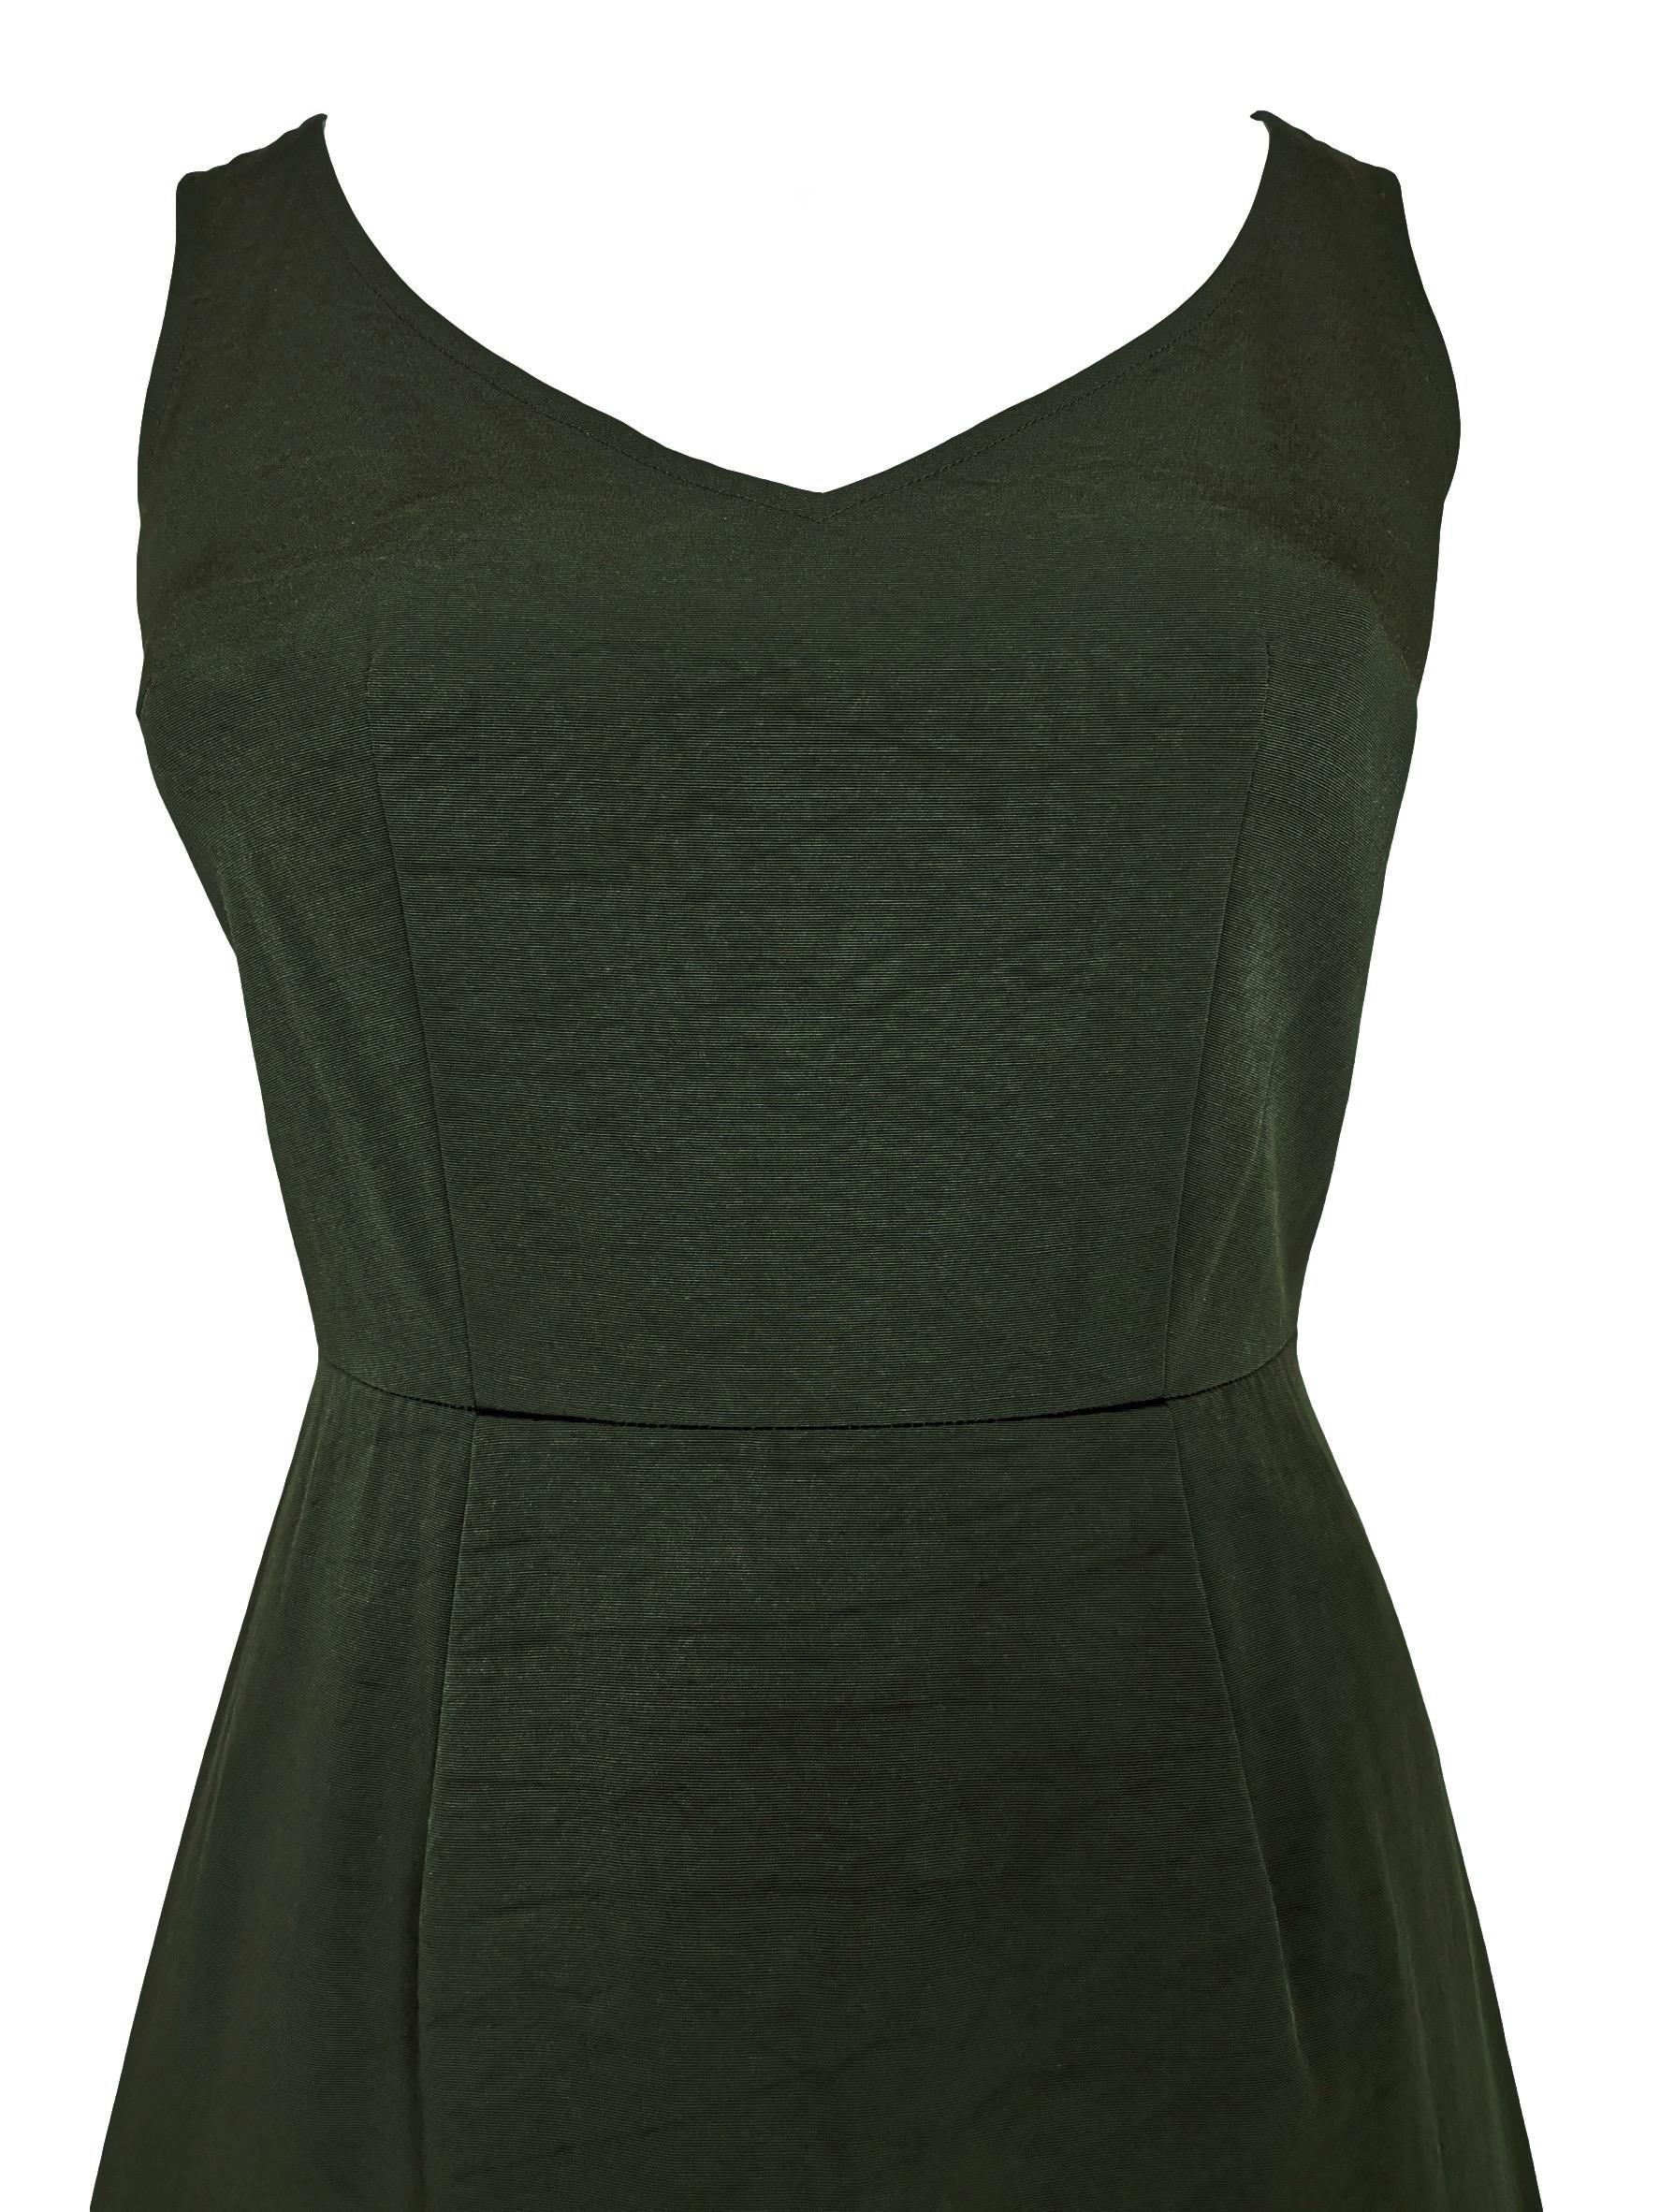 Comme des Garcons
A Line Army Green Dress
AD 1999
Size S